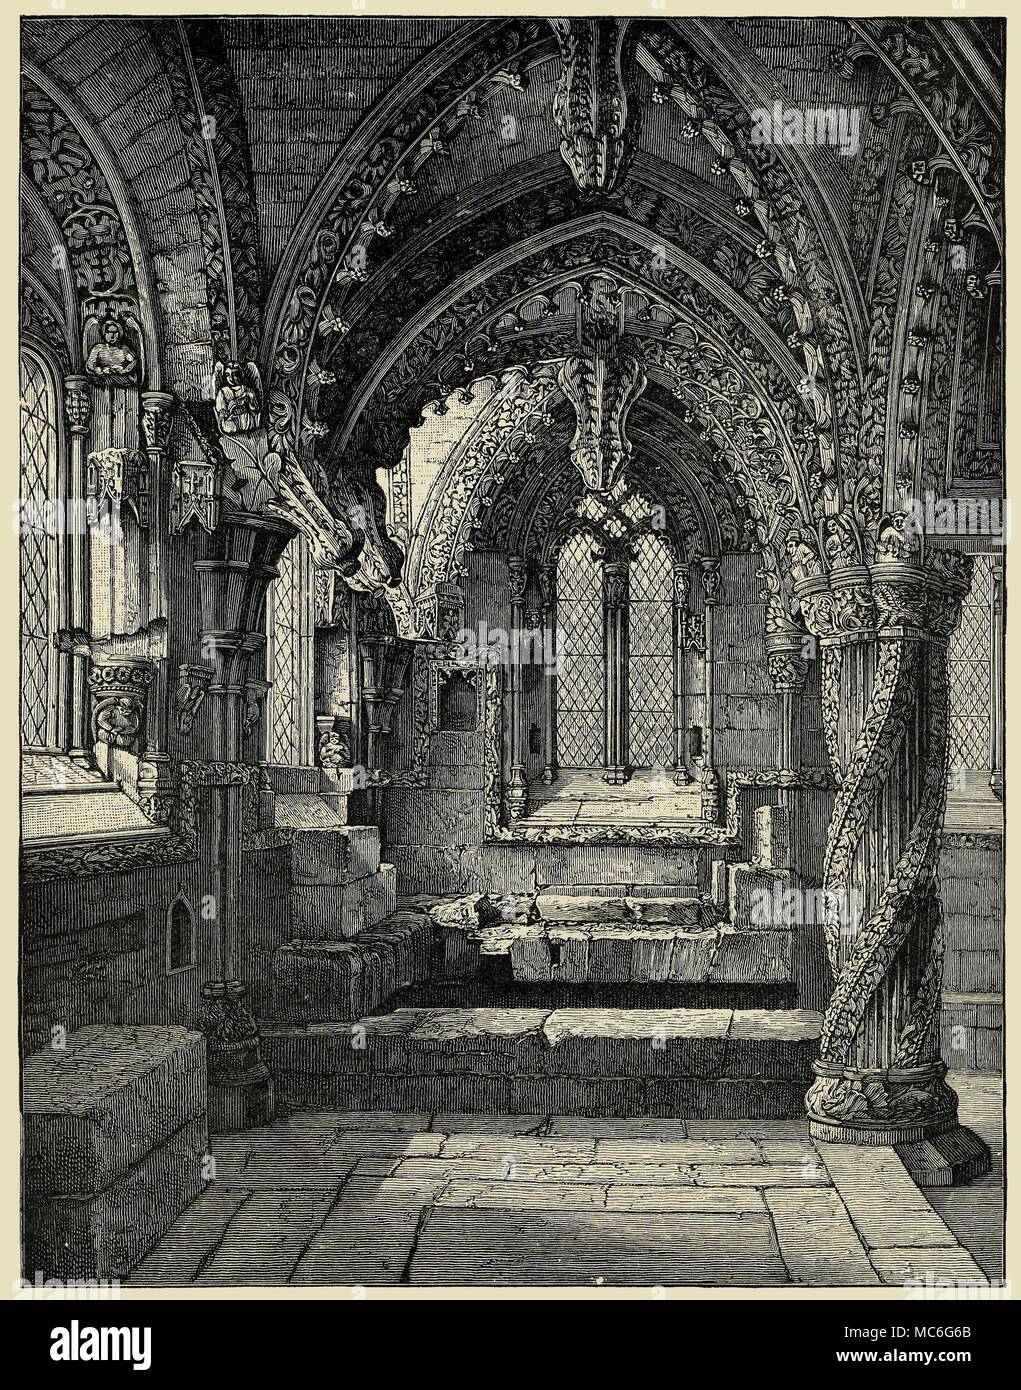 BRITISH MYTHS - ROSSLYN, SCOTLAND The south-east corner of the Lady Chapel, Rosslyn. From John Richard Green, A Short History of the English People, 1902 edn. Stock Photo